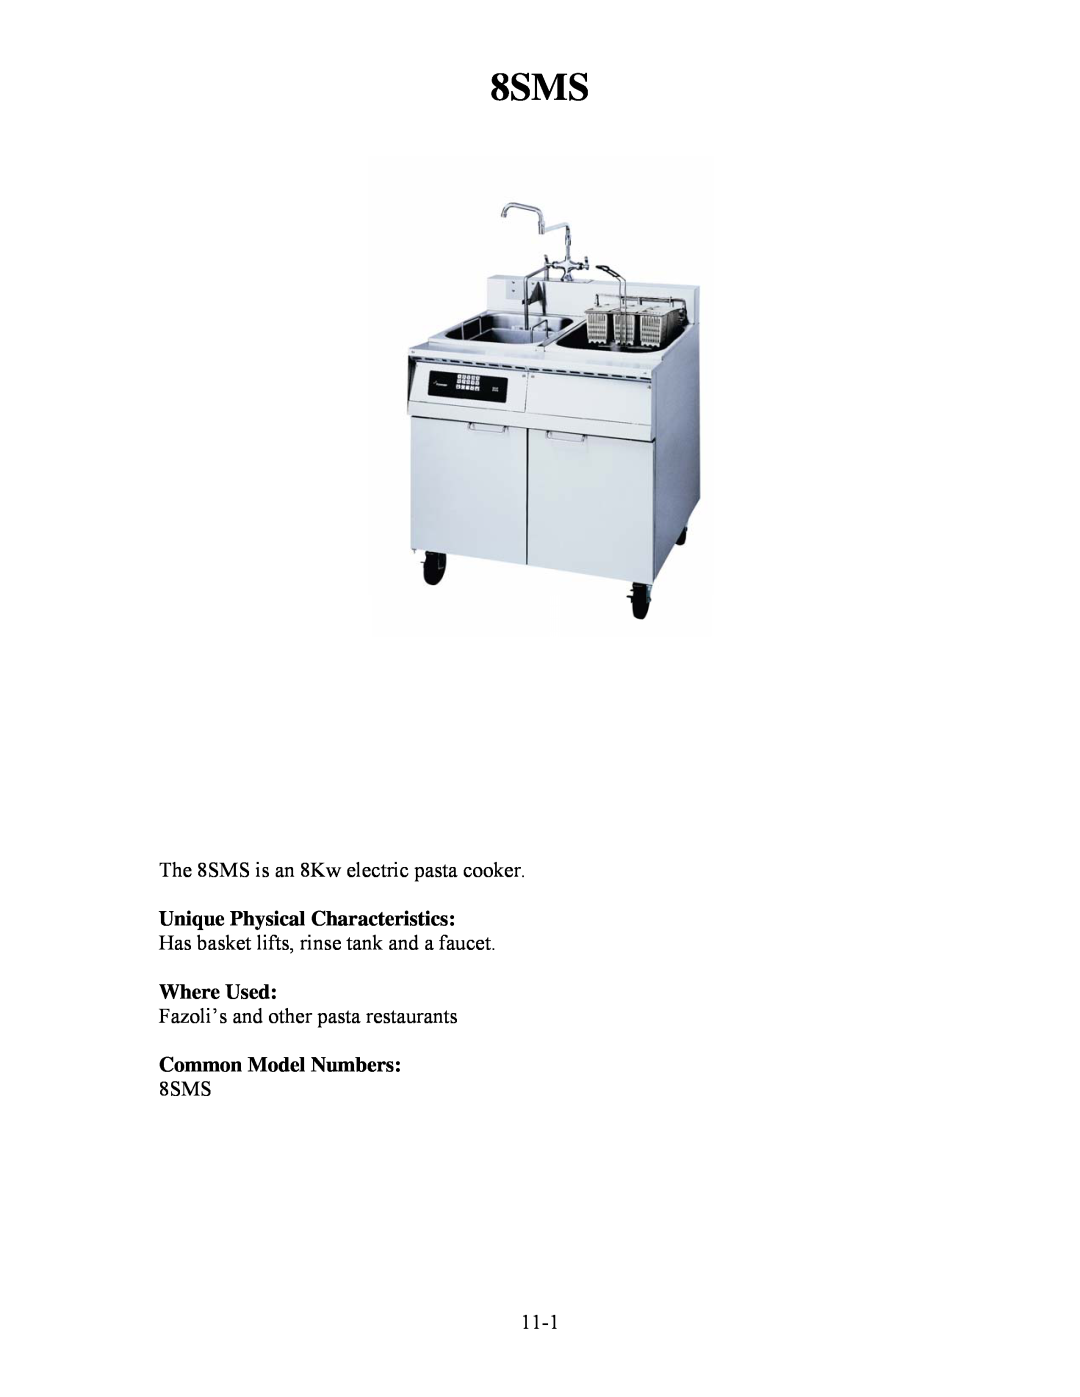 Frymaster H55 manual The 8SMS is an 8Kw electric pasta cooker, Fazoli’s and other pasta restaurants, 11-1, Where Used 